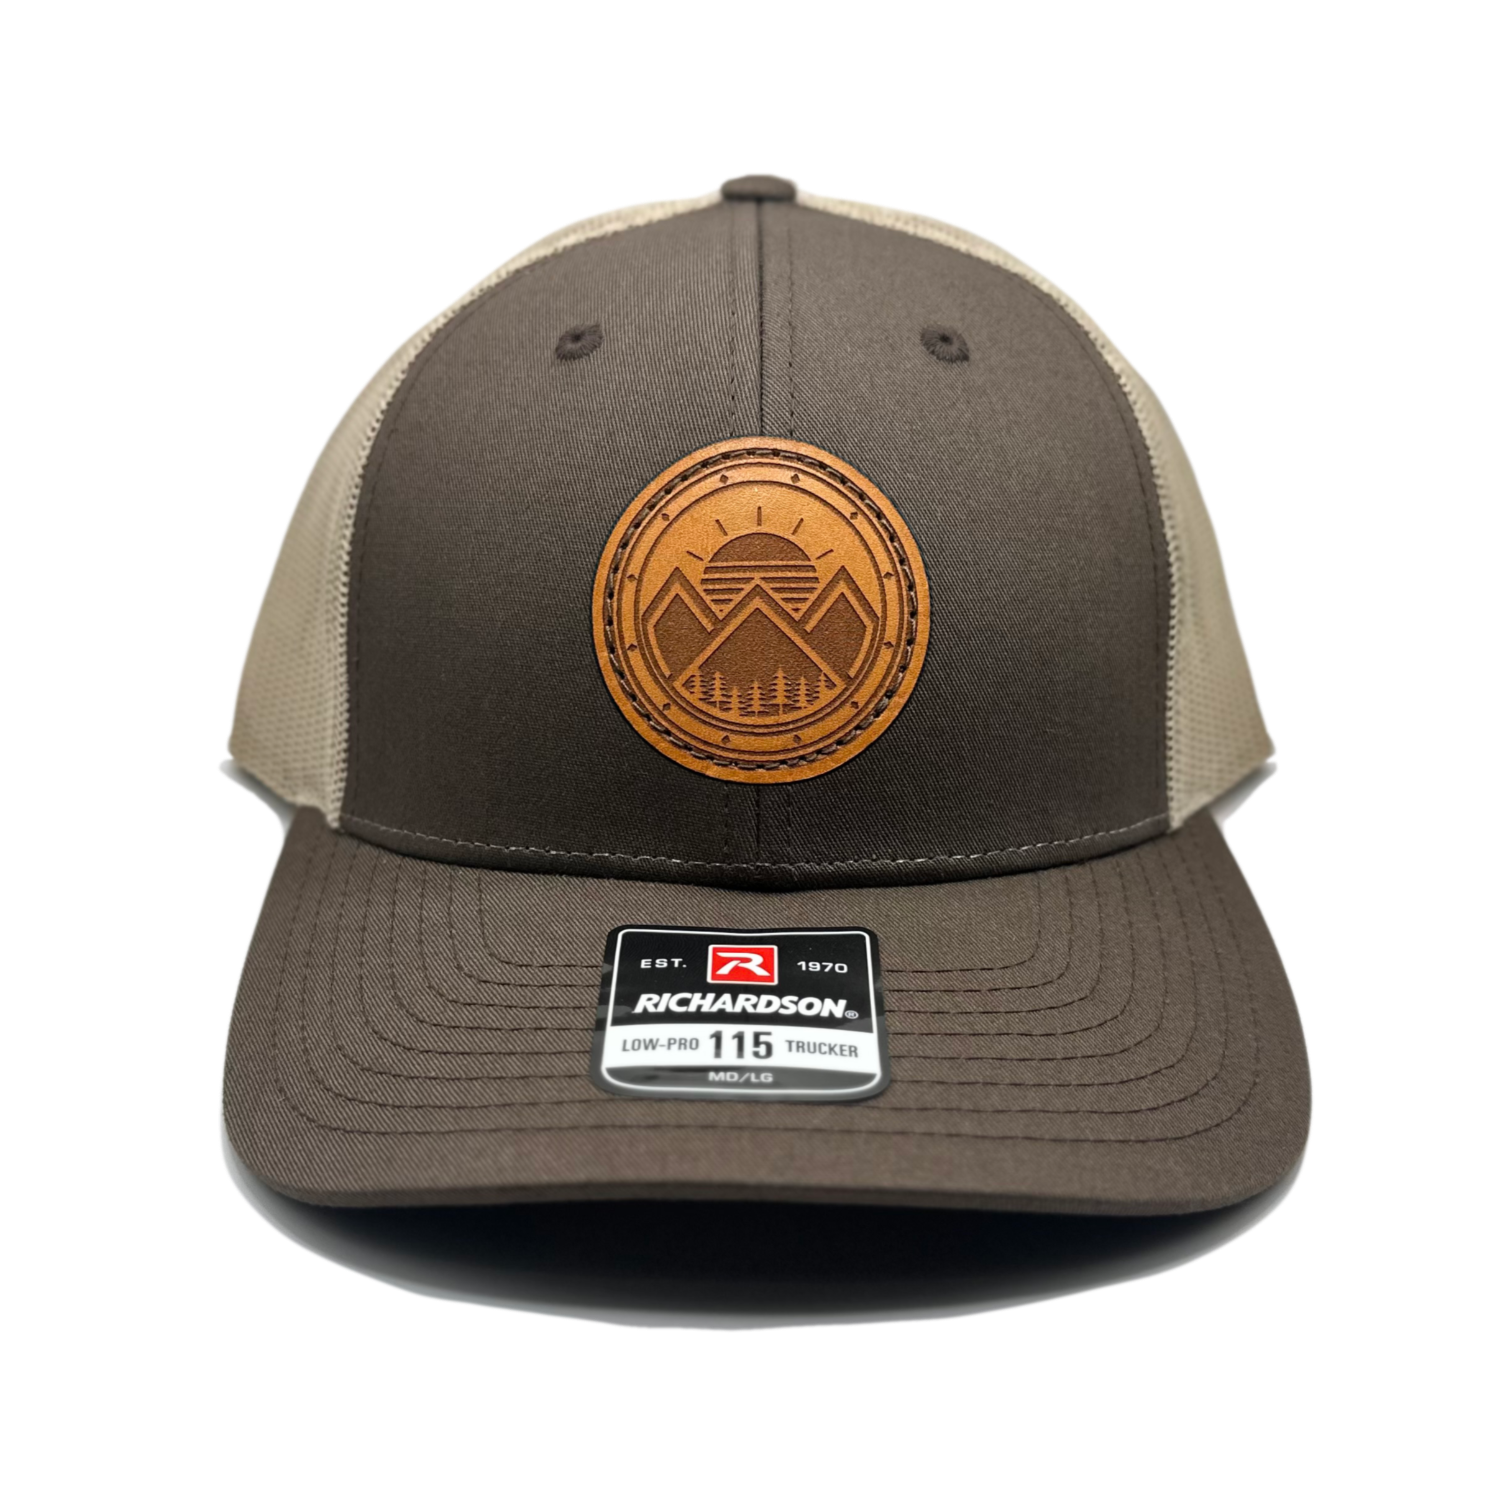 A unique leather patch hat called Modern Mountains, featuring a one-of-a-kind design with 3 mountain peaks, a sunrise, pine trees, and decorative border on a circular patch. Made in the USA, this authentic leather patch is sewn onto a SnapBack adjustable hat. Available in small and m/l sizes in the Richardson 115 style, and multiple colors in the Richardson 112. Inspired by the mountainous surroundings of our Colorado location, this hat is perfect for those who appreciate high-quality, stylish leather patch